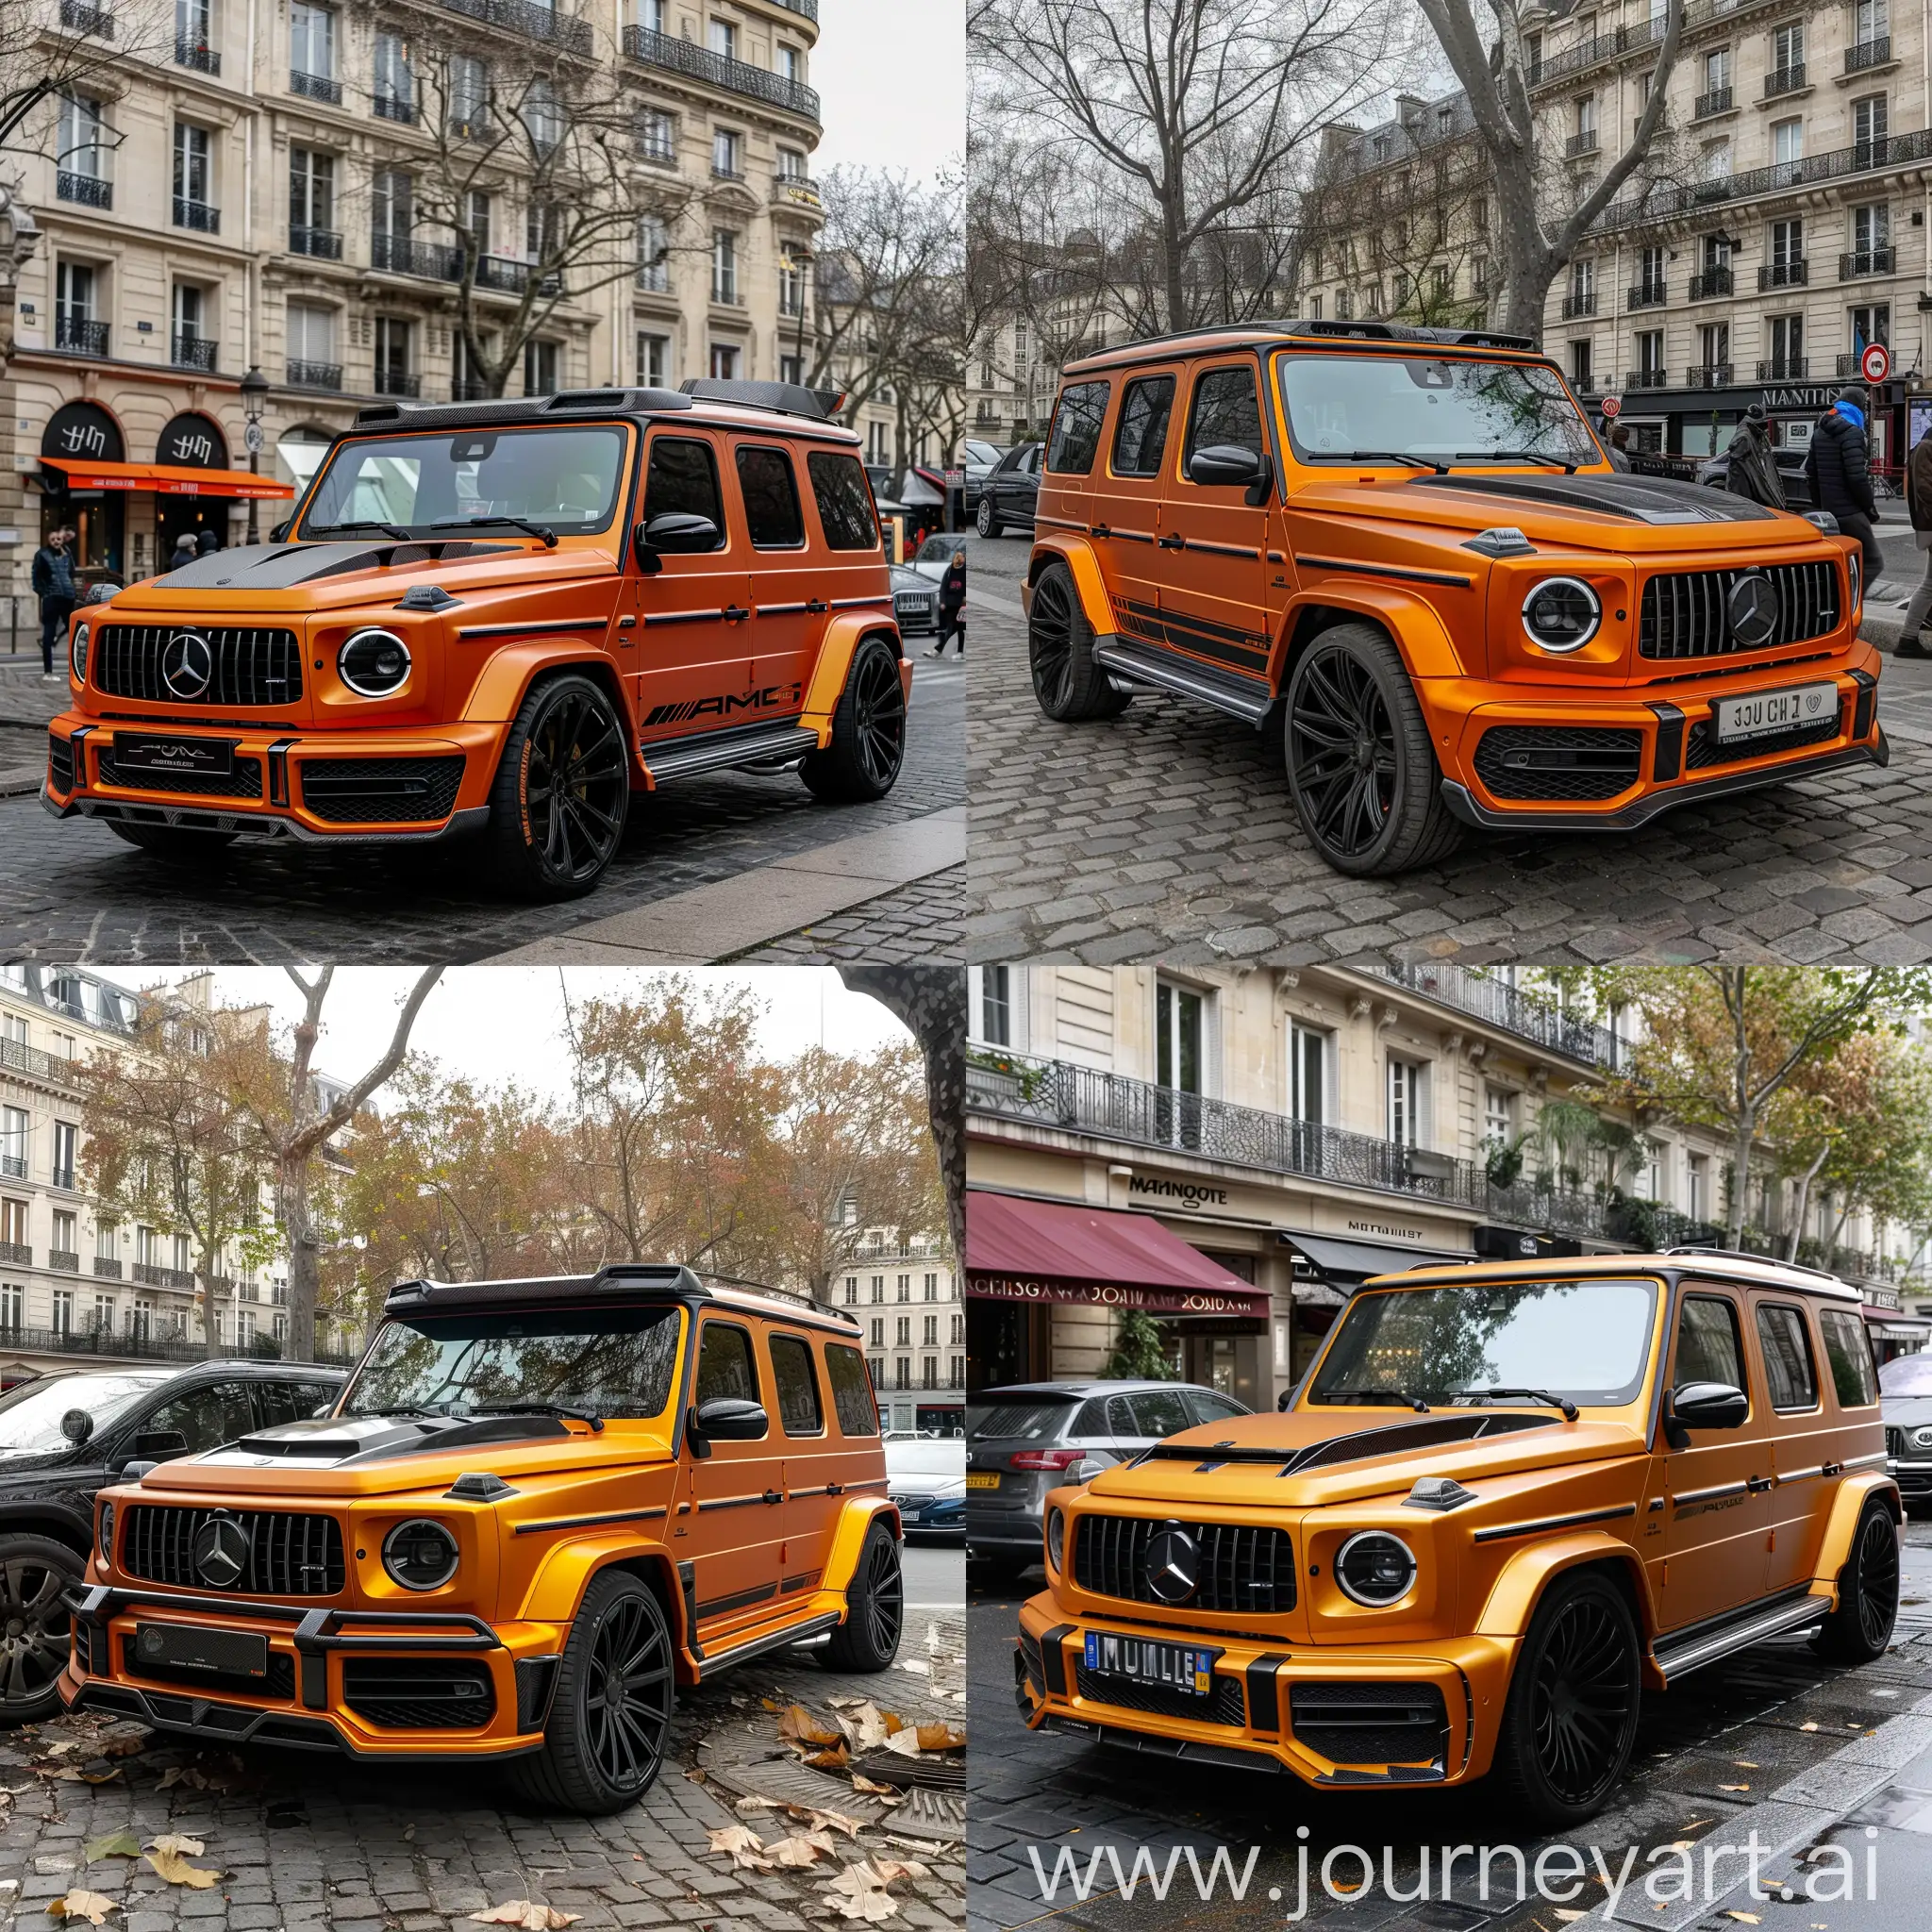 Mercedes g63 wagon 2022 in orange Mansory tune with special black rims parked in centrum of paris real life footage spotted